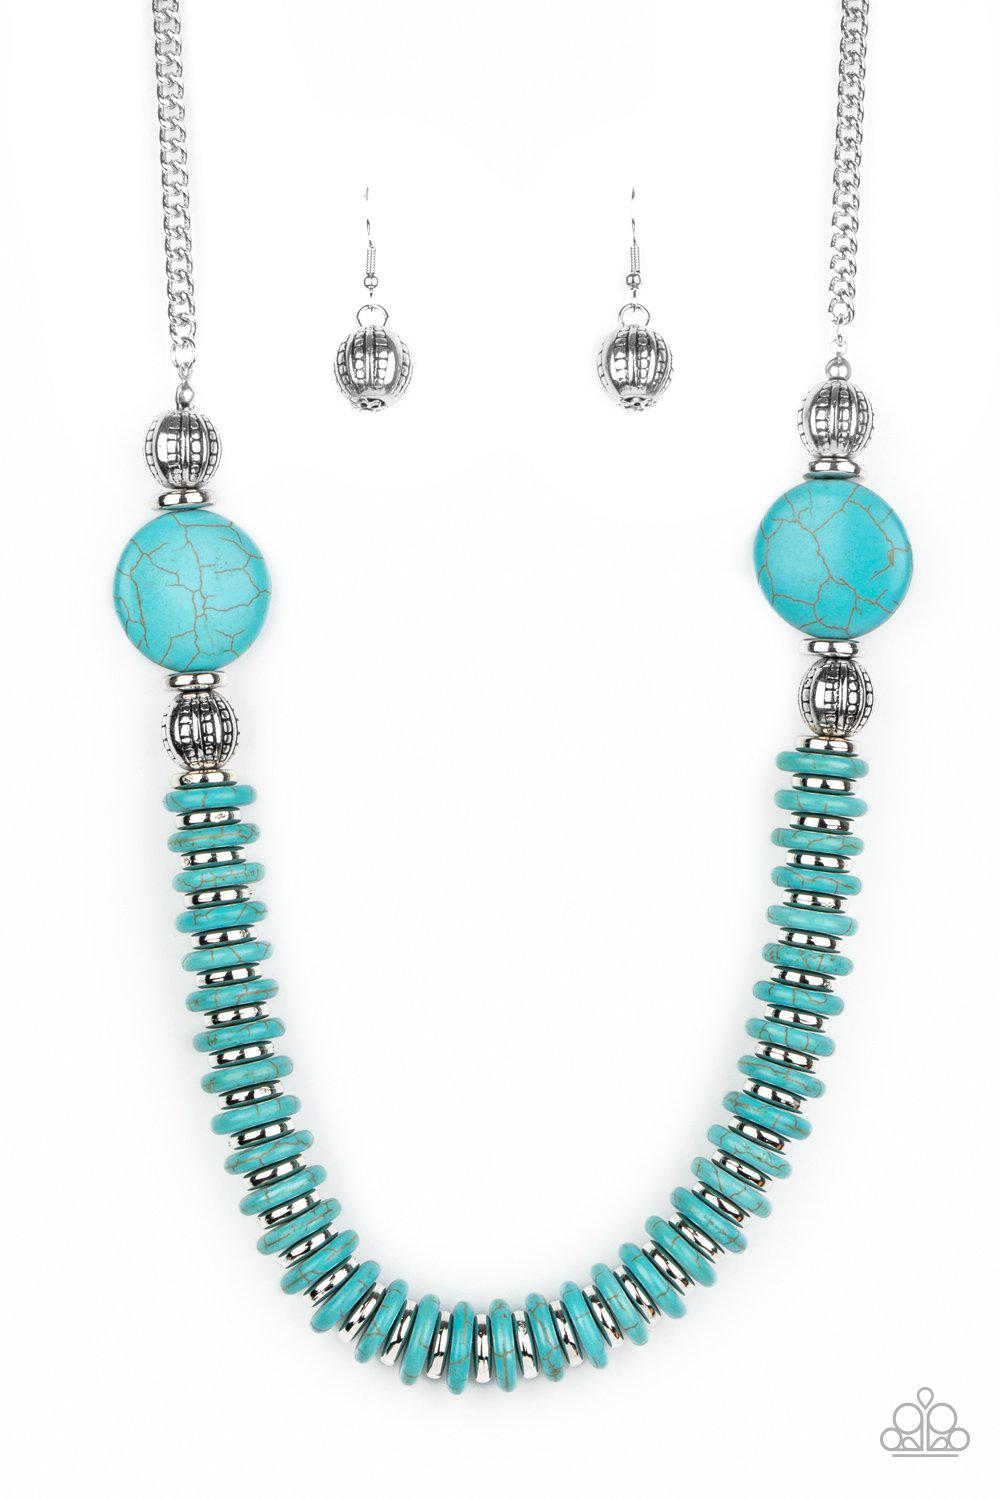 Desert Revival Turquoise Blue Stone and Silver Necklace - Paparazzi Accessories- lightbox - CarasShop.com - $5 Jewelry by Cara Jewels